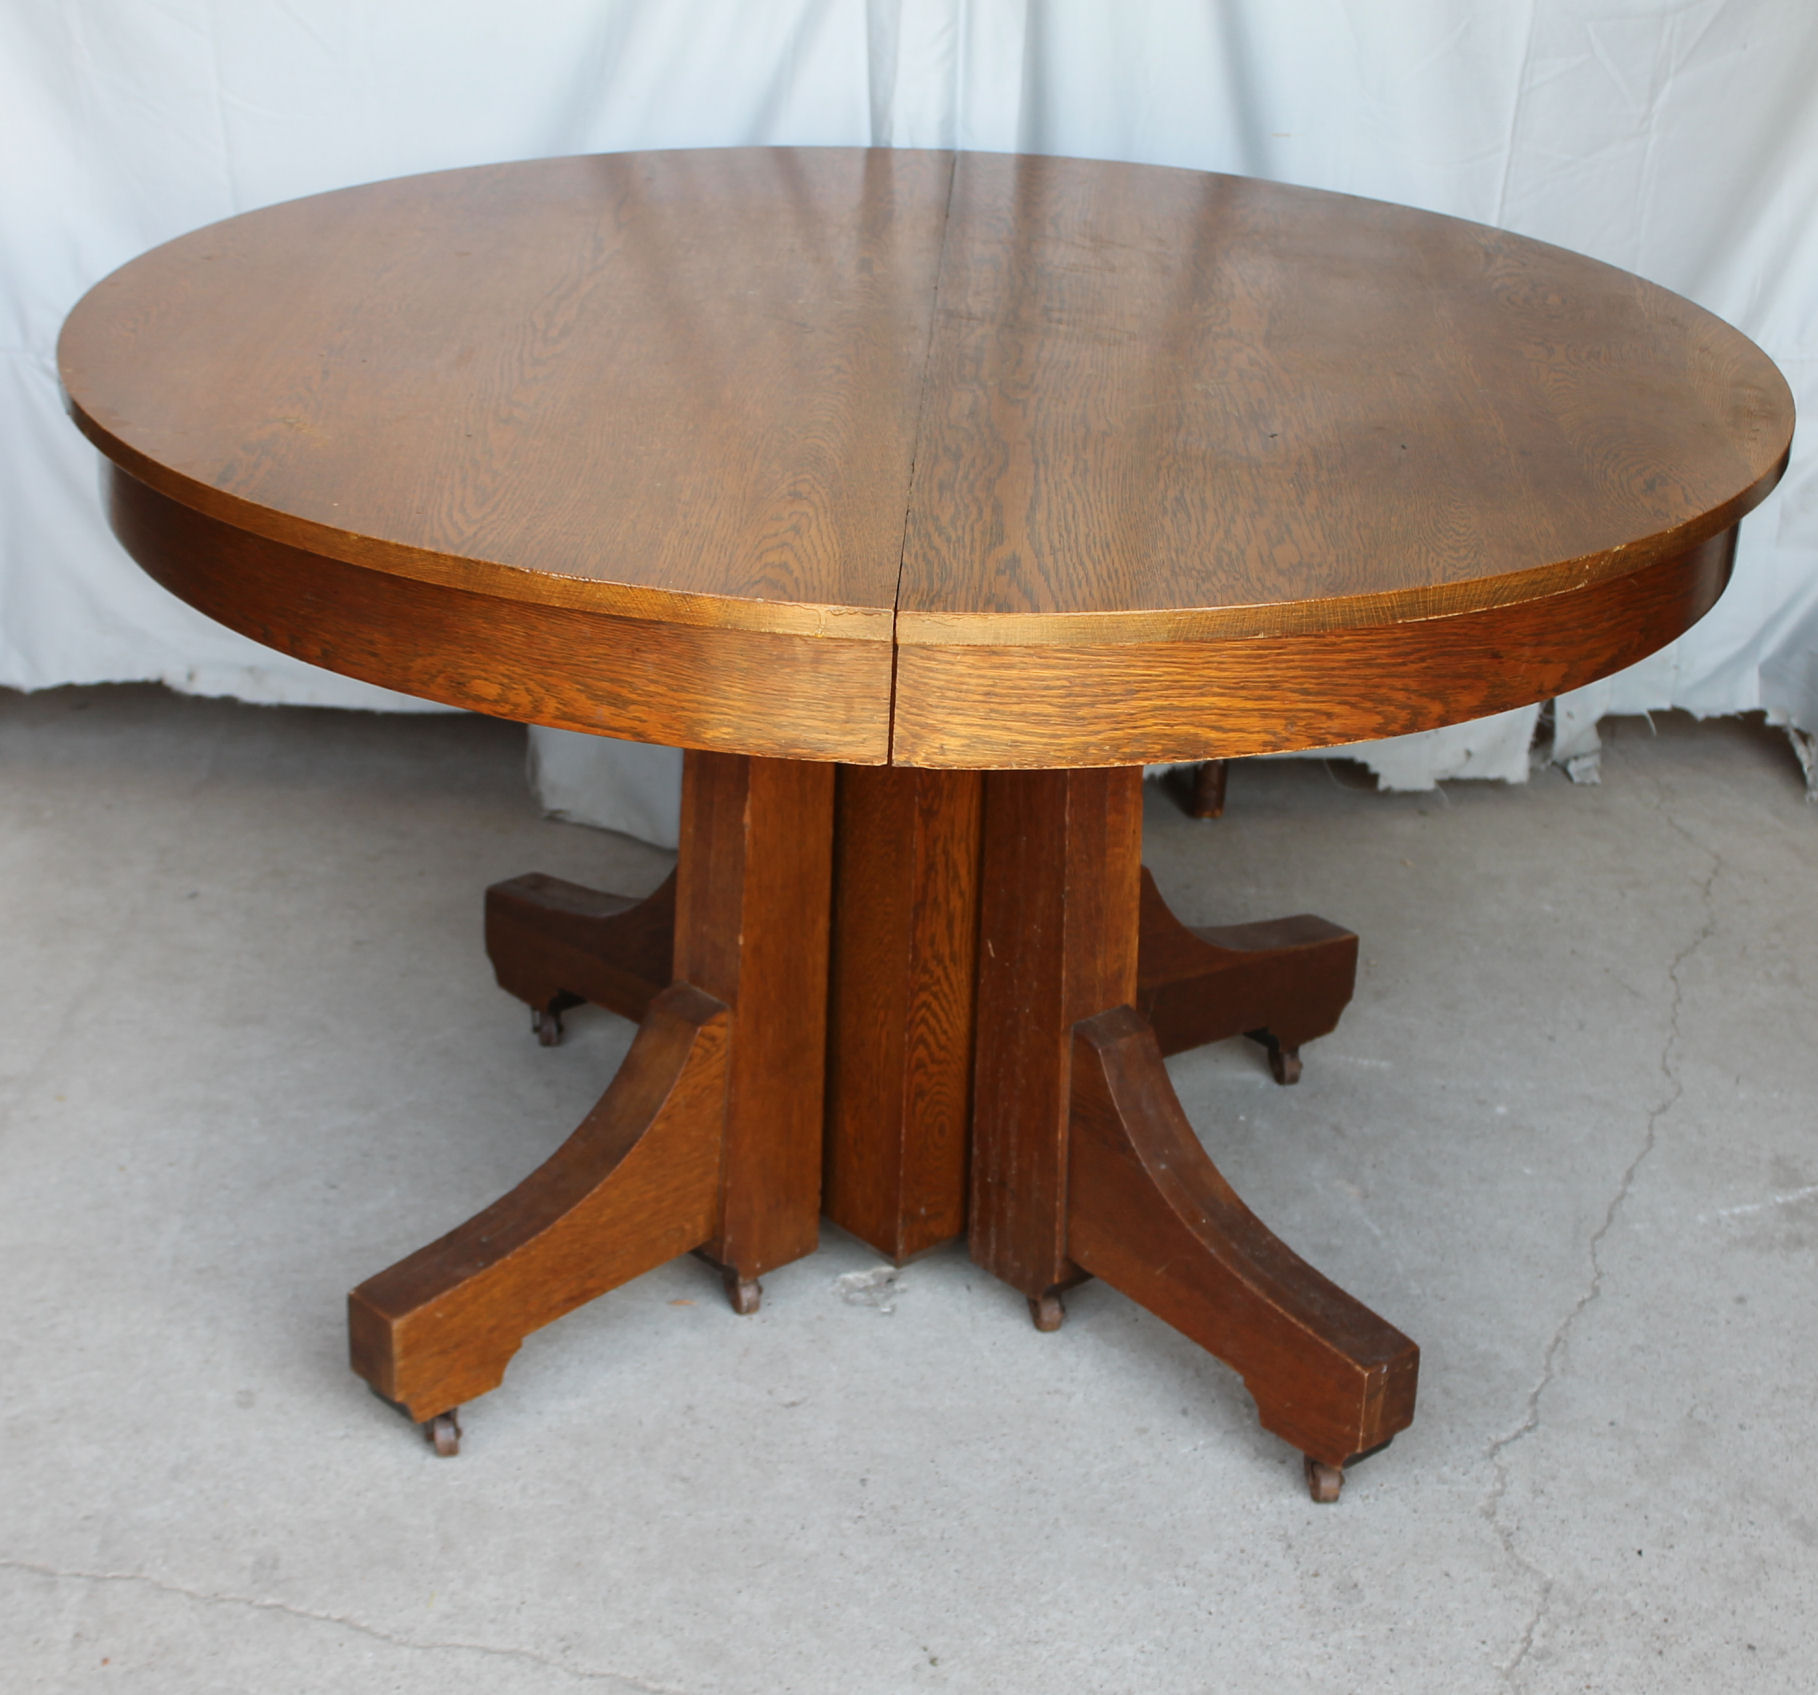 Antique Mission Style Round Oak Table, Vintage Round Oak Table And Chairs